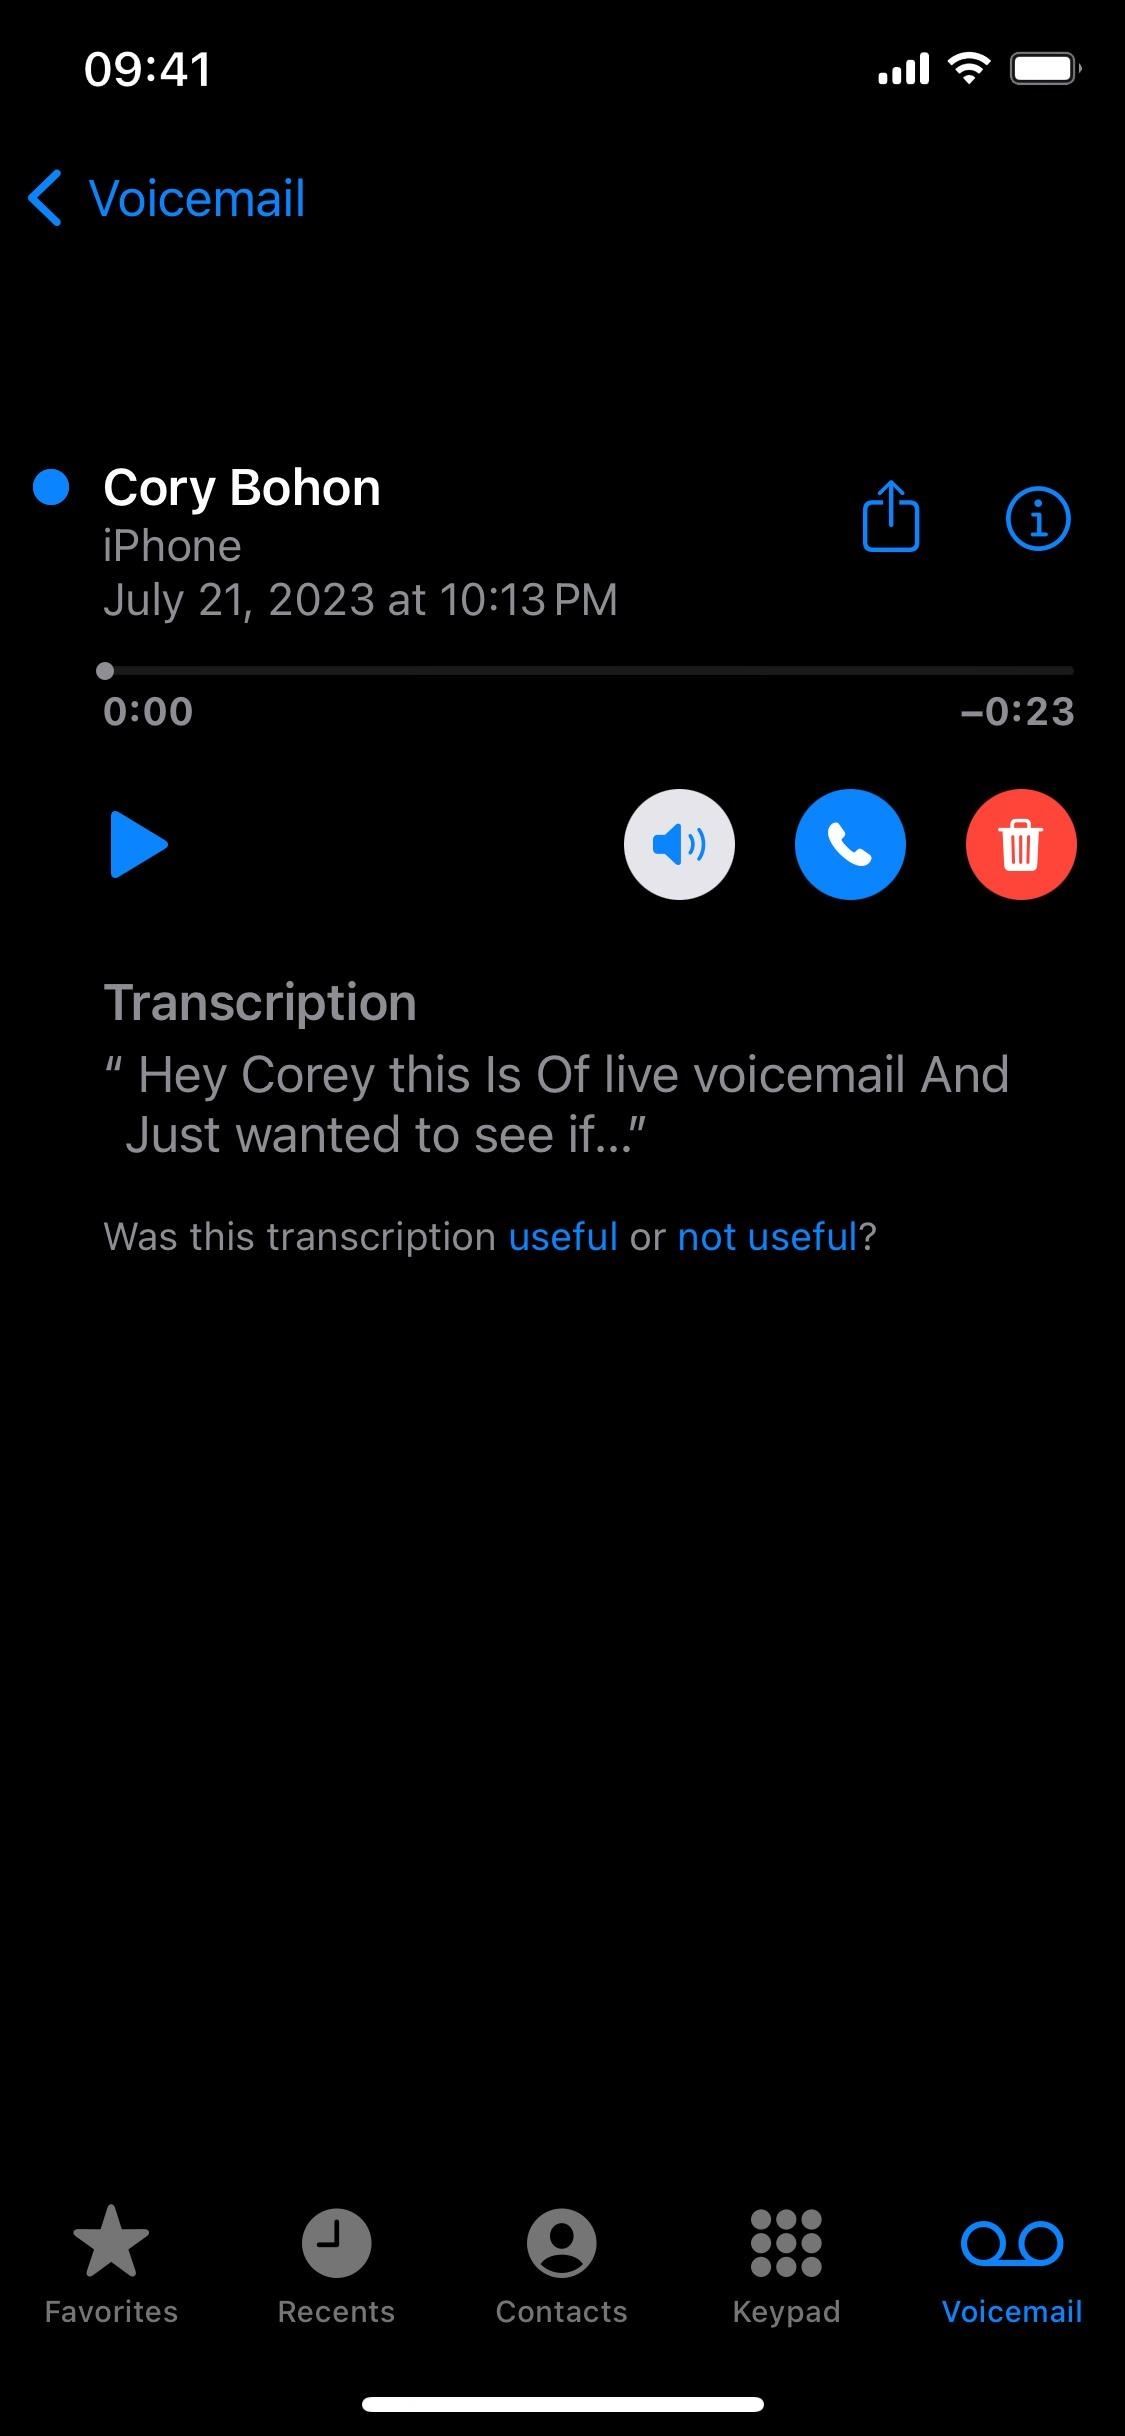 How to Use iOS 17's Live Voicemail Feature on Your iPhone — Everything You Need to Know